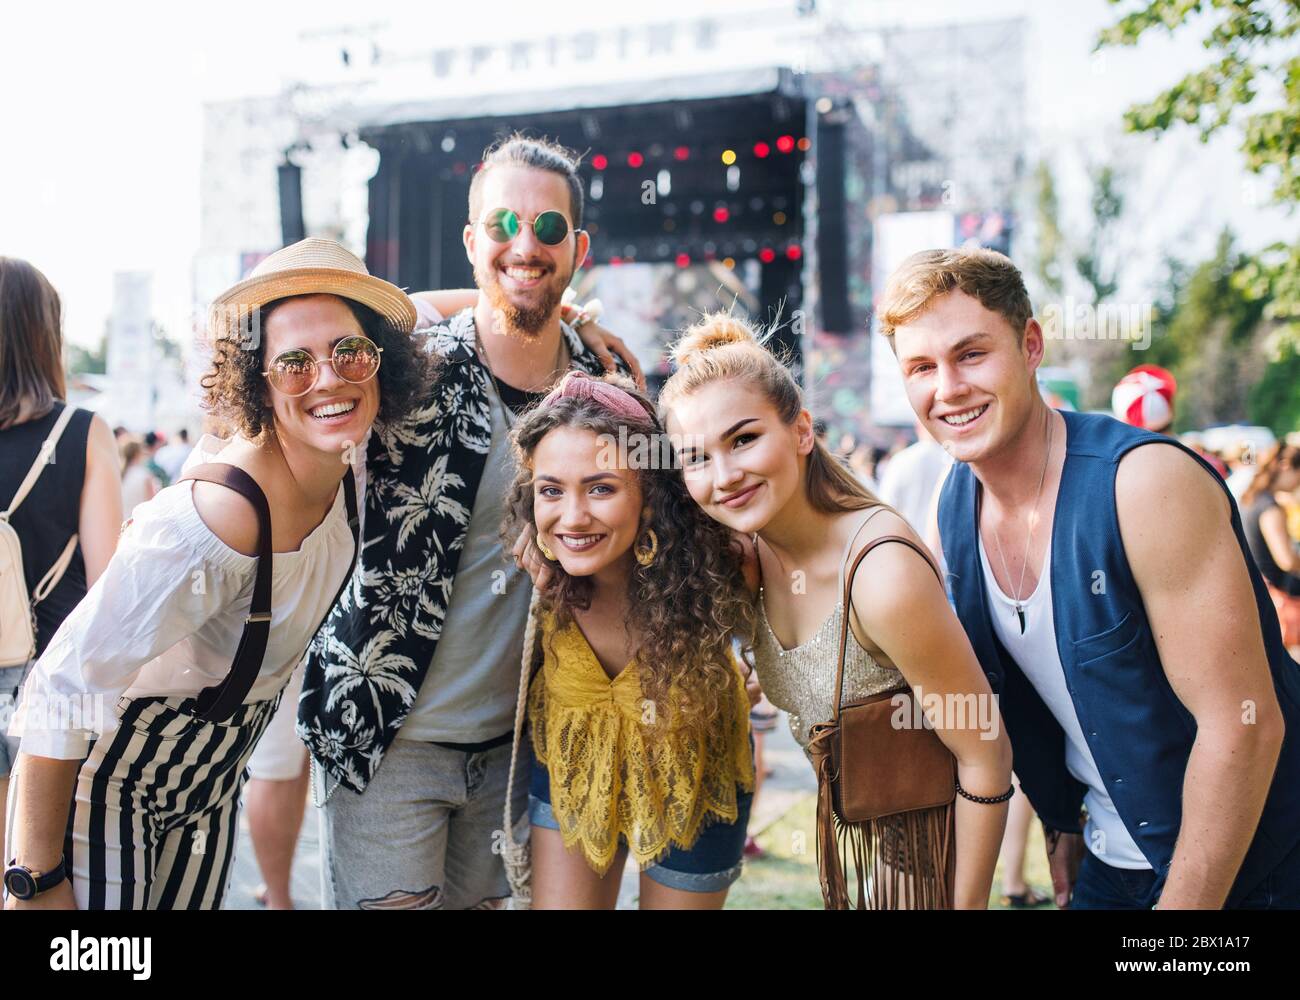 Group of young friends at summer festival. Stock Photo